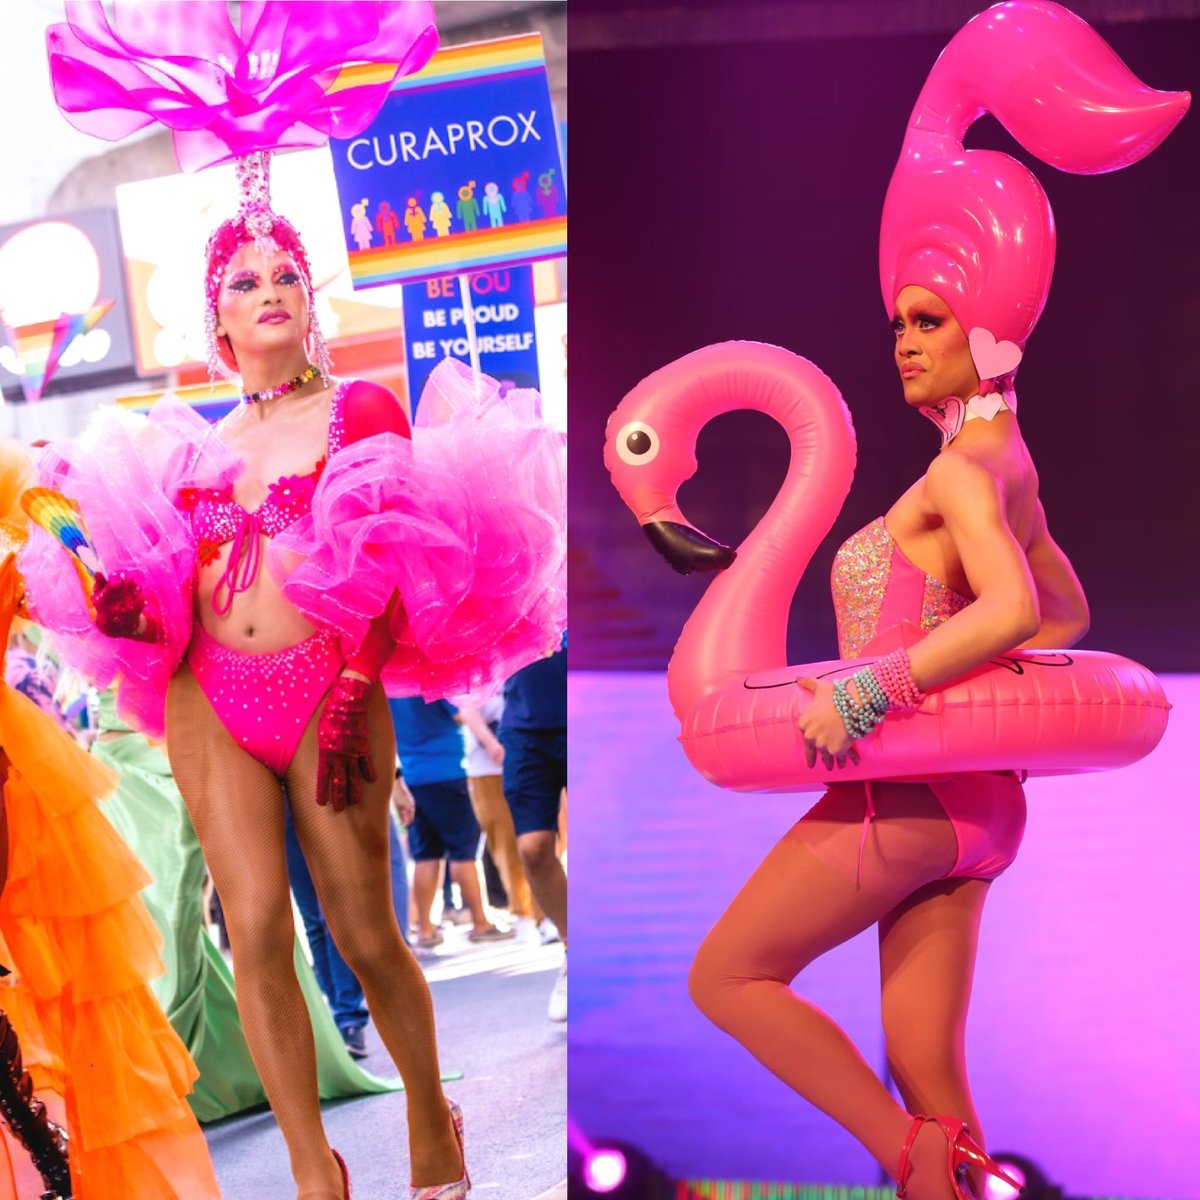 When you pay homage to yourself, 6 years of drag. All pink Flamingo girl 🦩.
#Amadiva #dragracethailand 

Now.                                                       Then